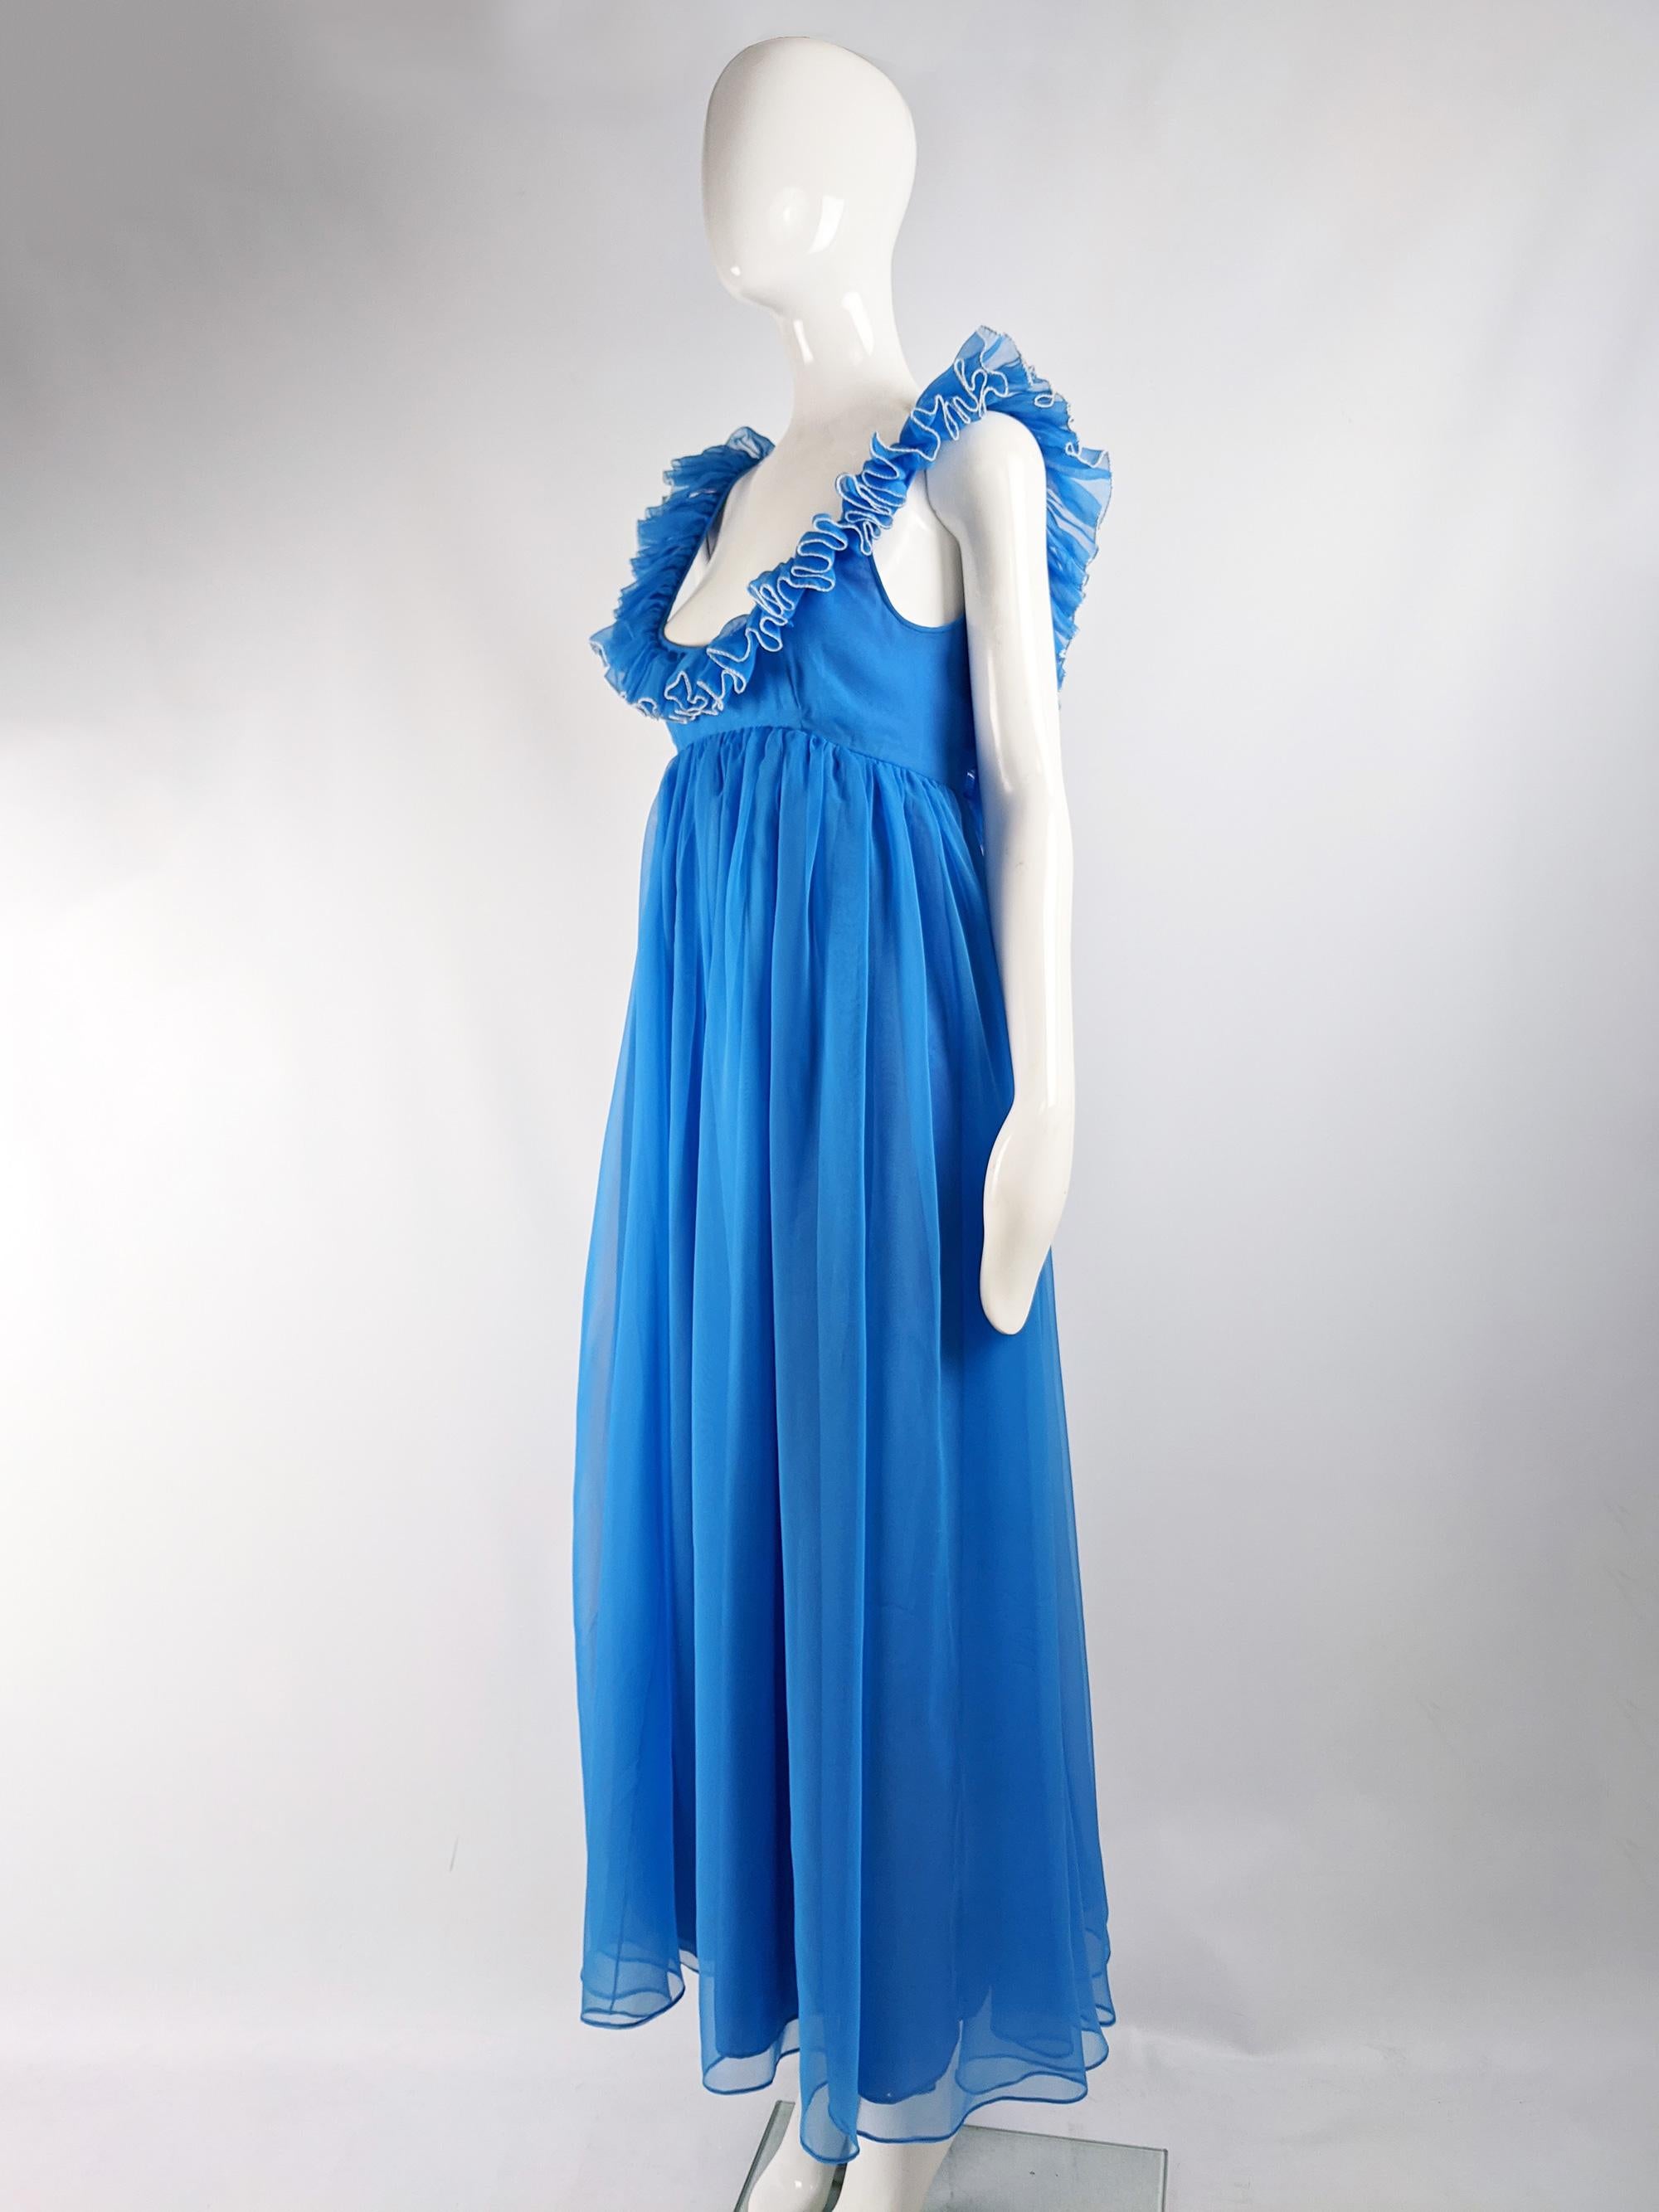 Jean Varon Vintage 1960s Blue Chiffon Maxi Evening Dress In Excellent Condition For Sale In Doncaster, South Yorkshire